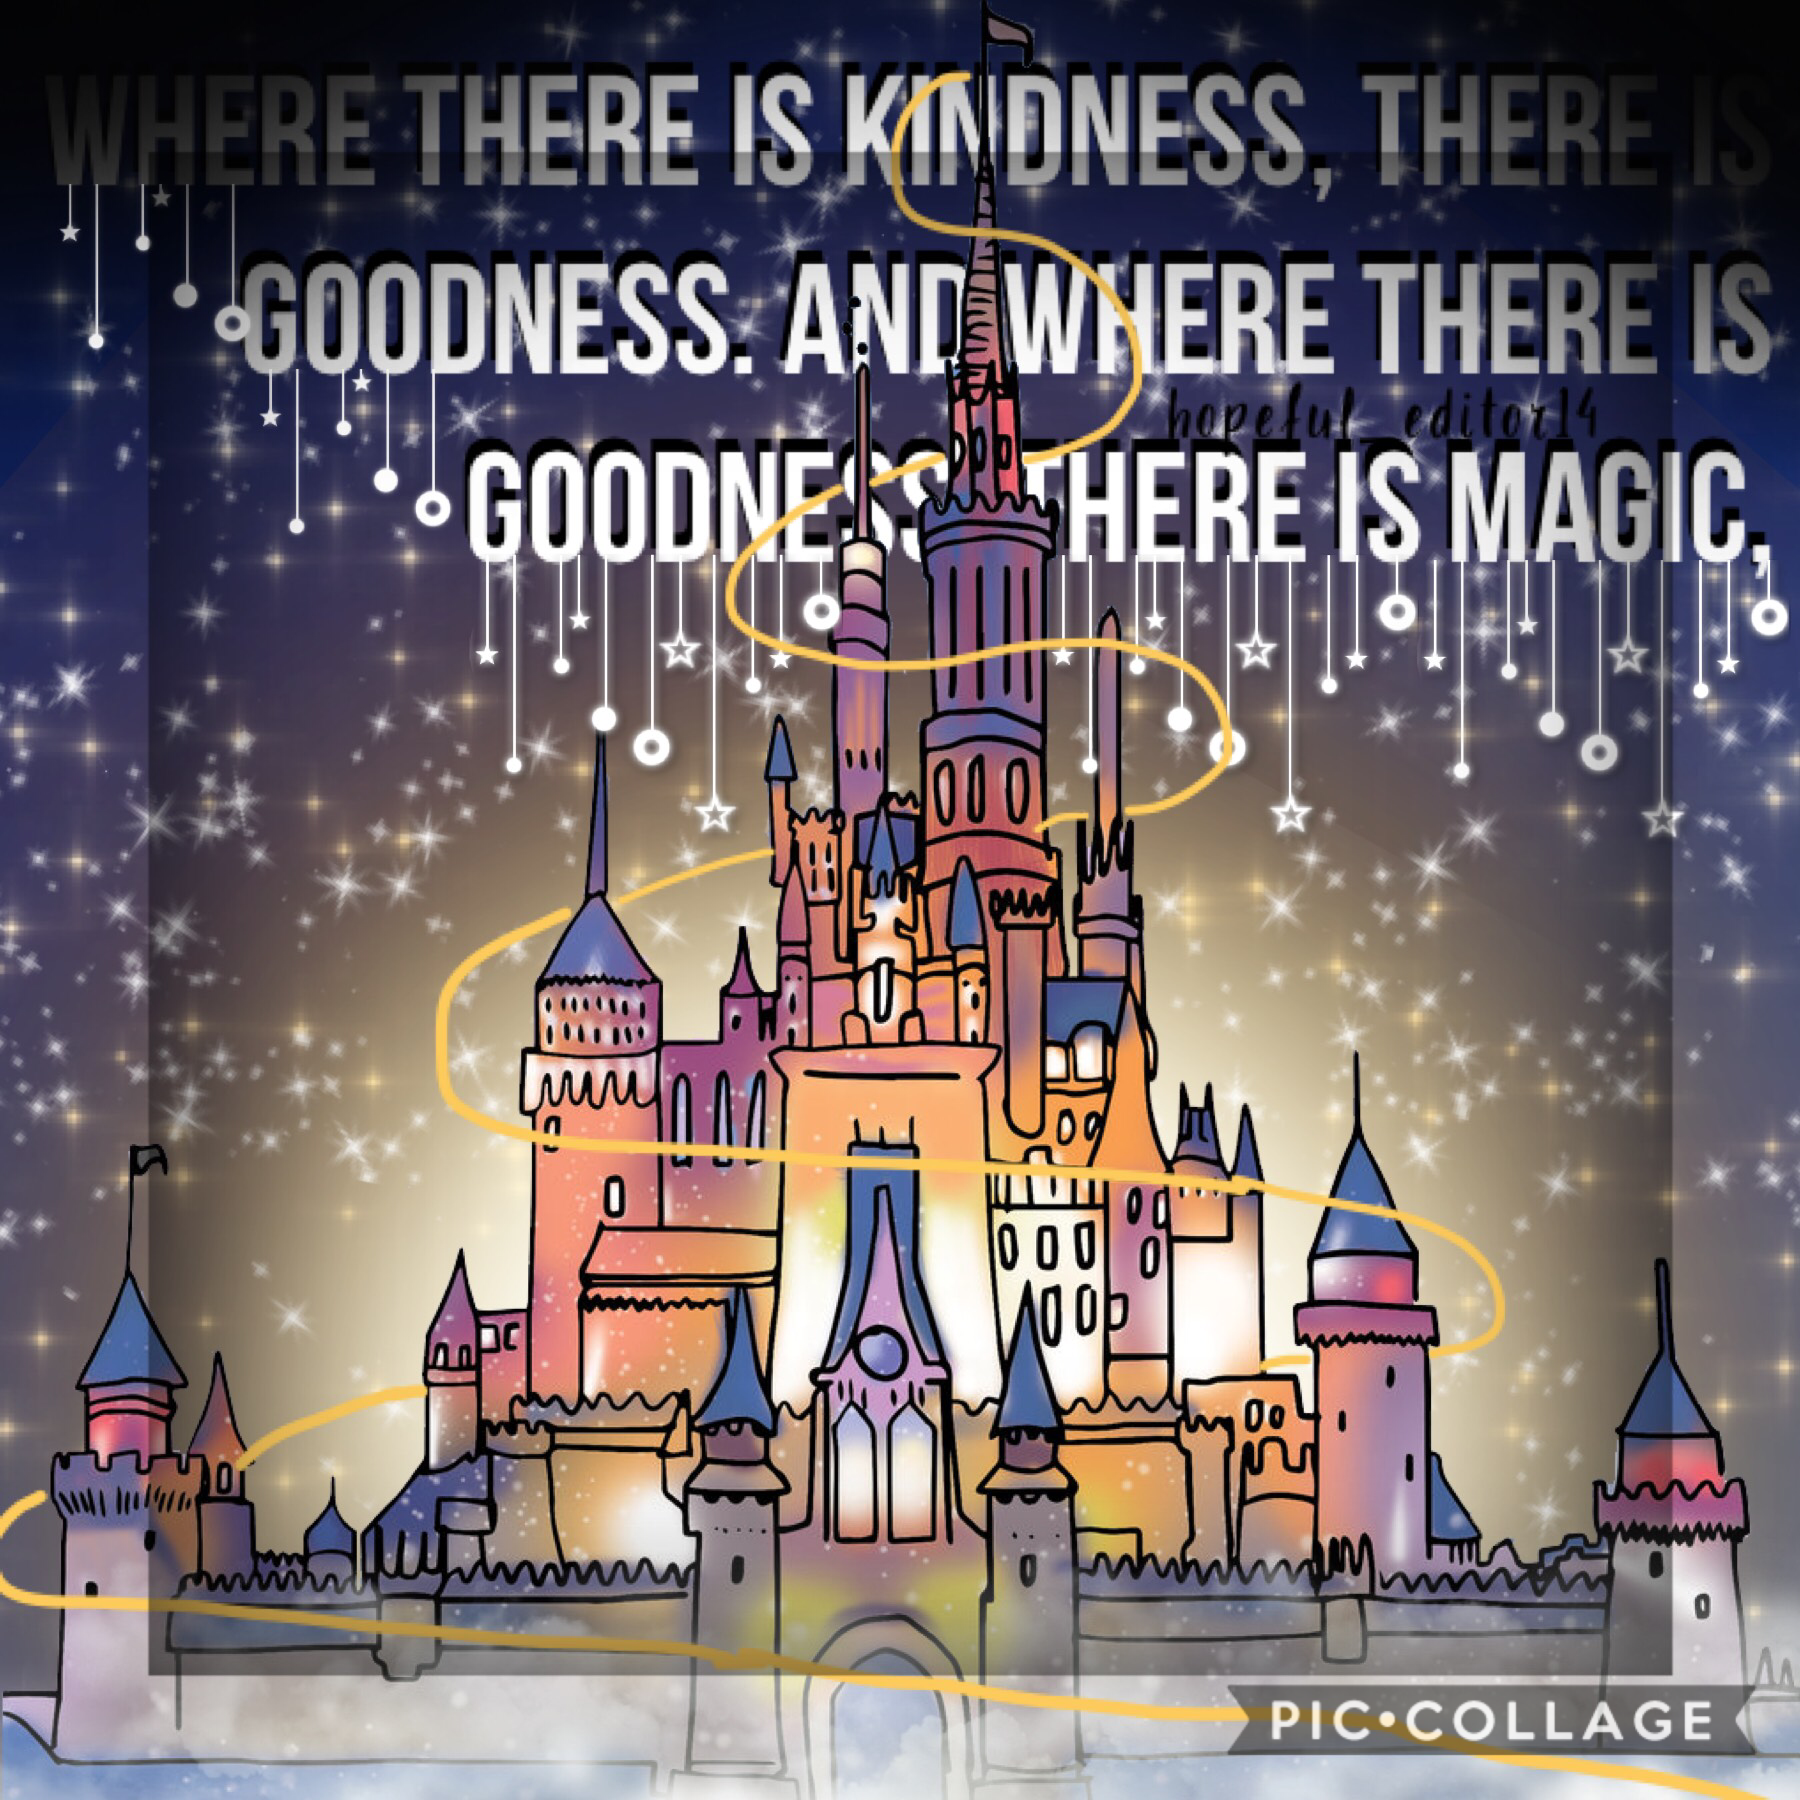 {where there is kindness, there is goodness. And where there is goodness, there is magic}